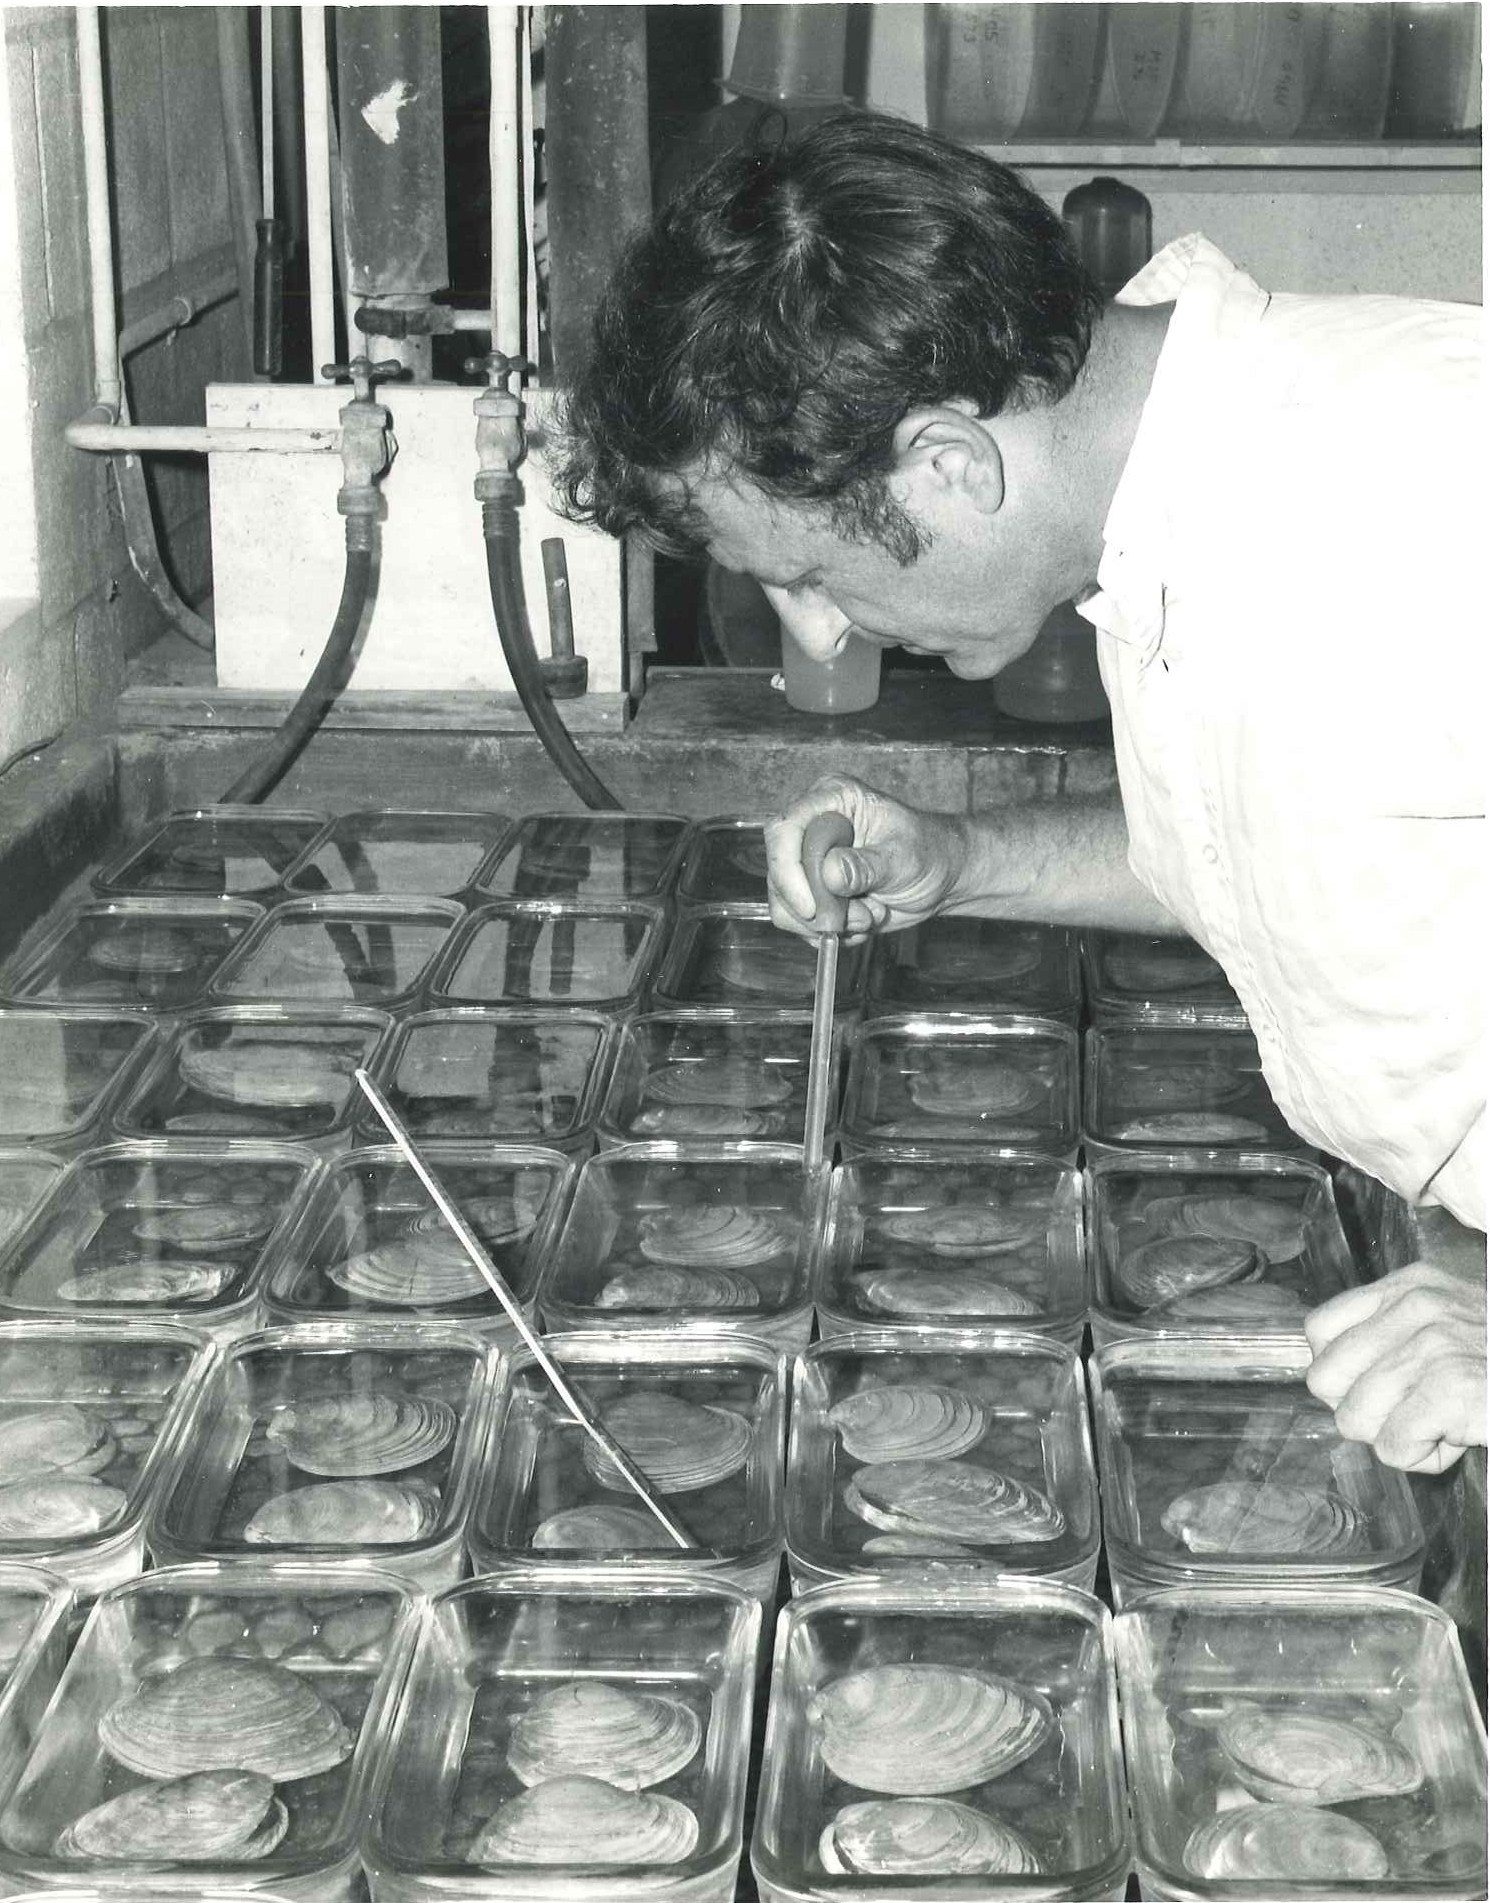 Dr. Mike Castagna spawning clams late 1960's/early 1970's